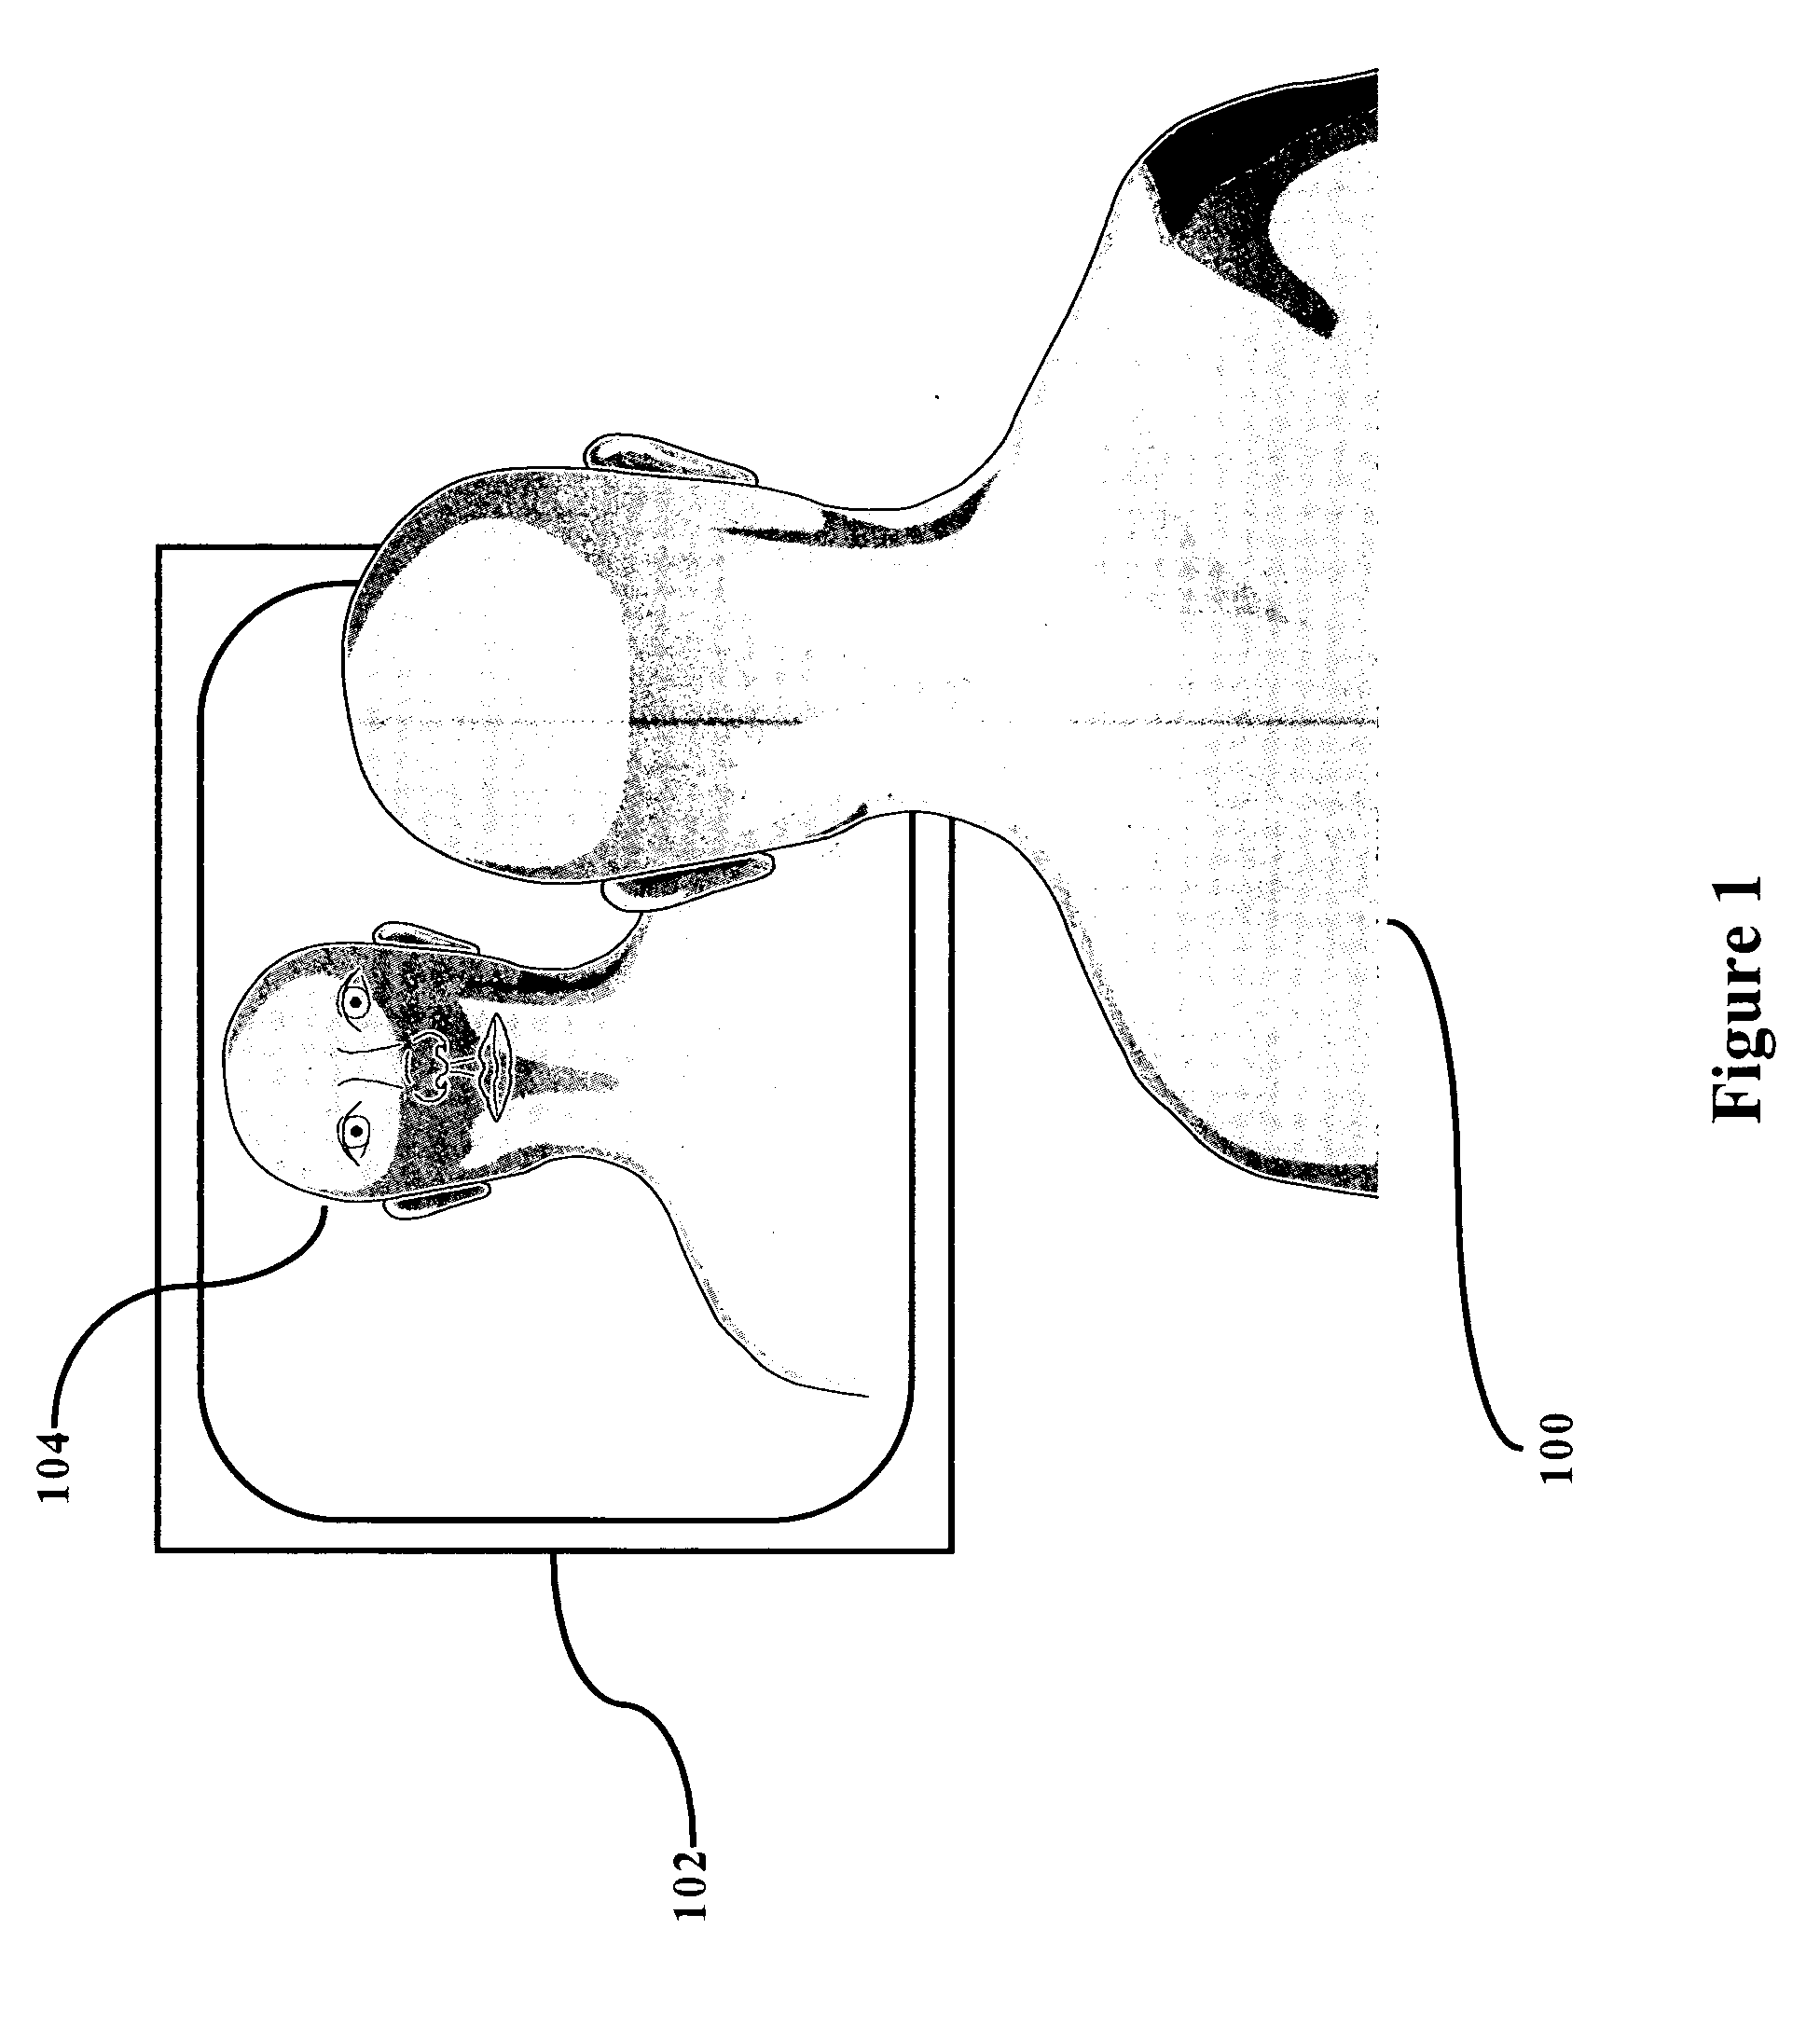 System and method for assisting speech development for the hearing-challenged